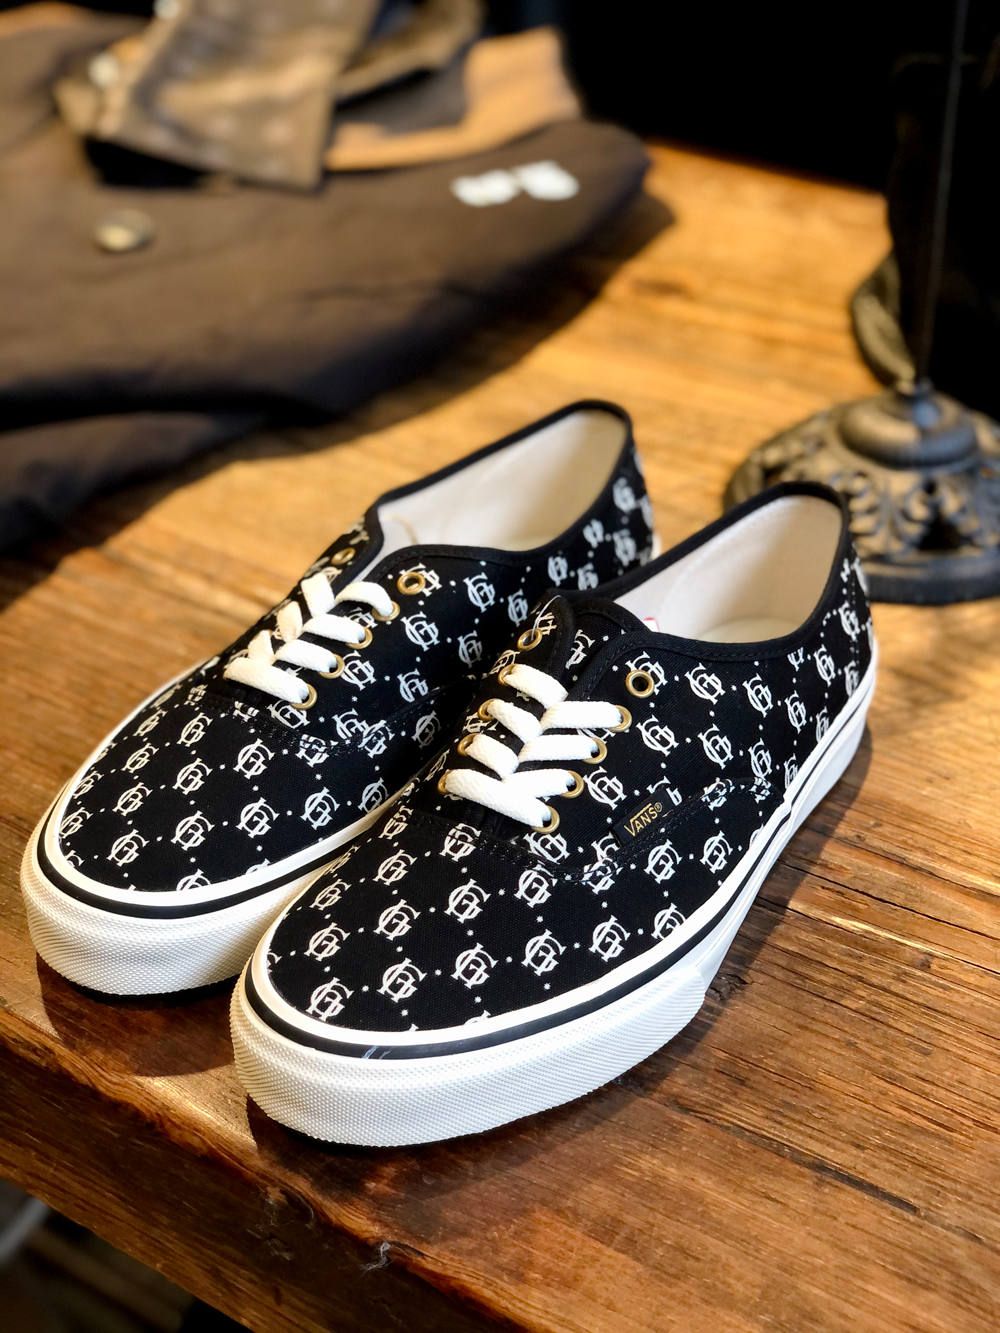 GLAD HAND & Co.   GLAD HAND×VANS PRICE DELIVERY AUTHENTIC "FAMILY CREST"    SKANDA